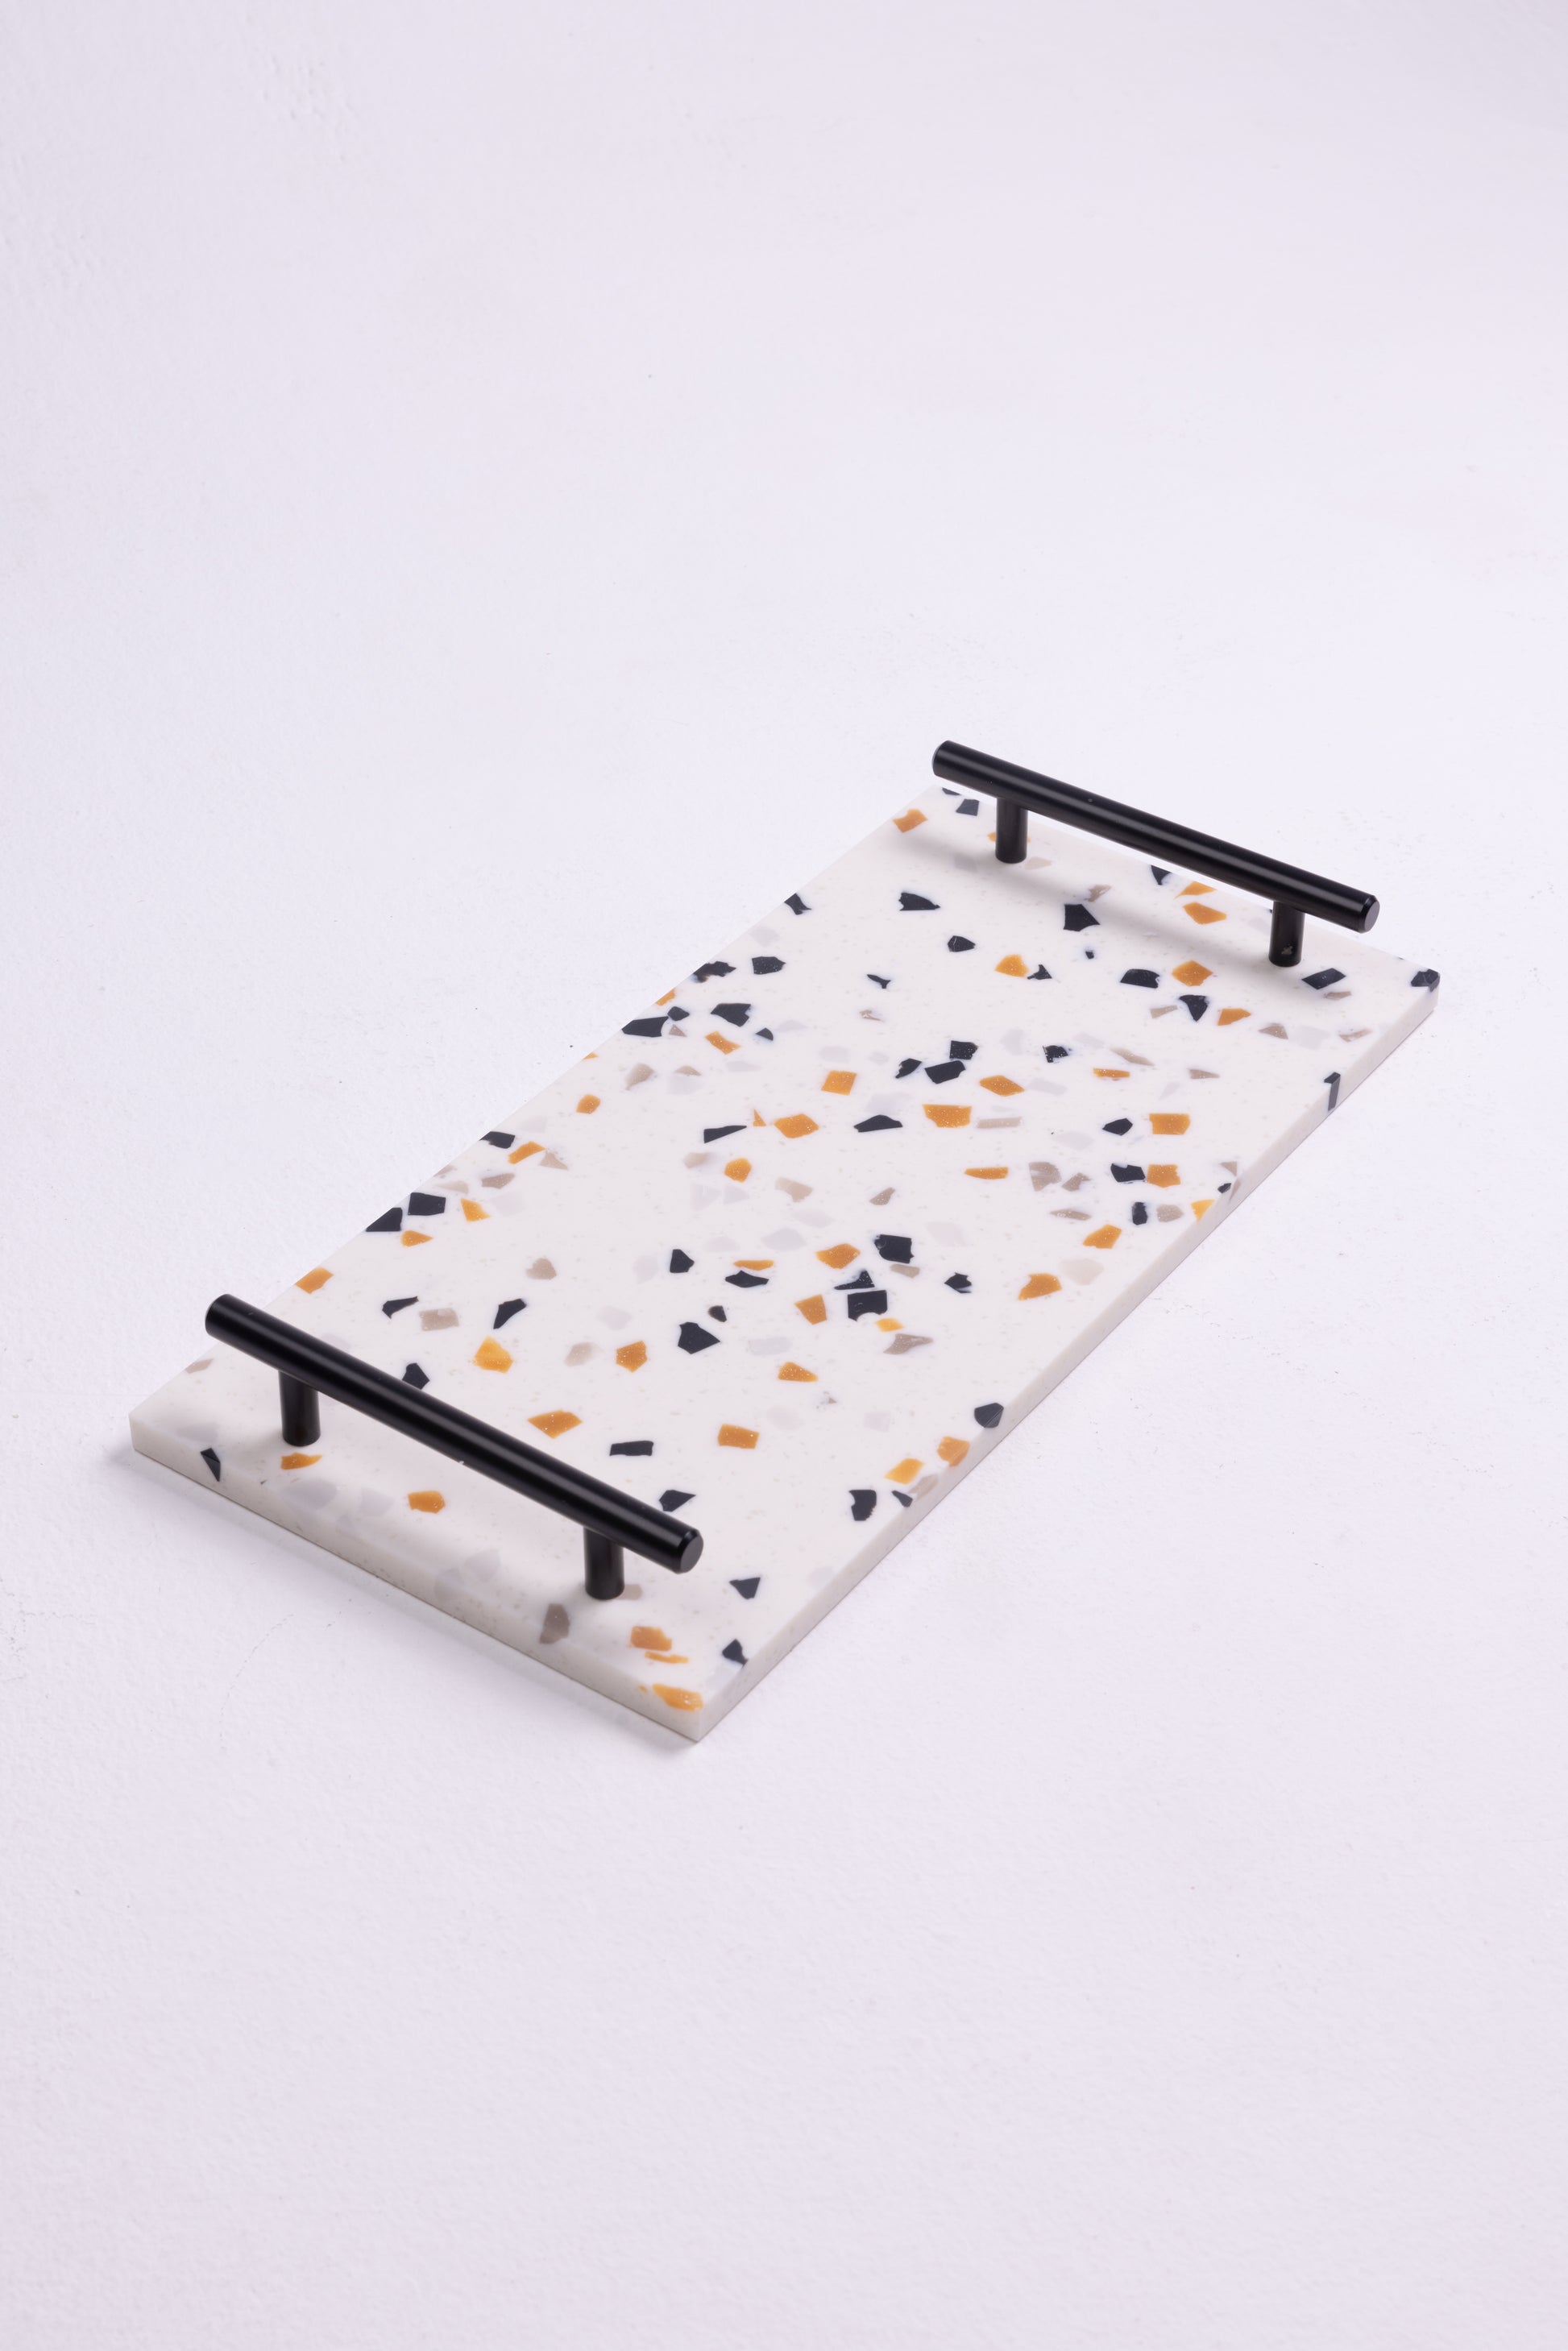 A coffee tray made from Corain material in terrazzo style